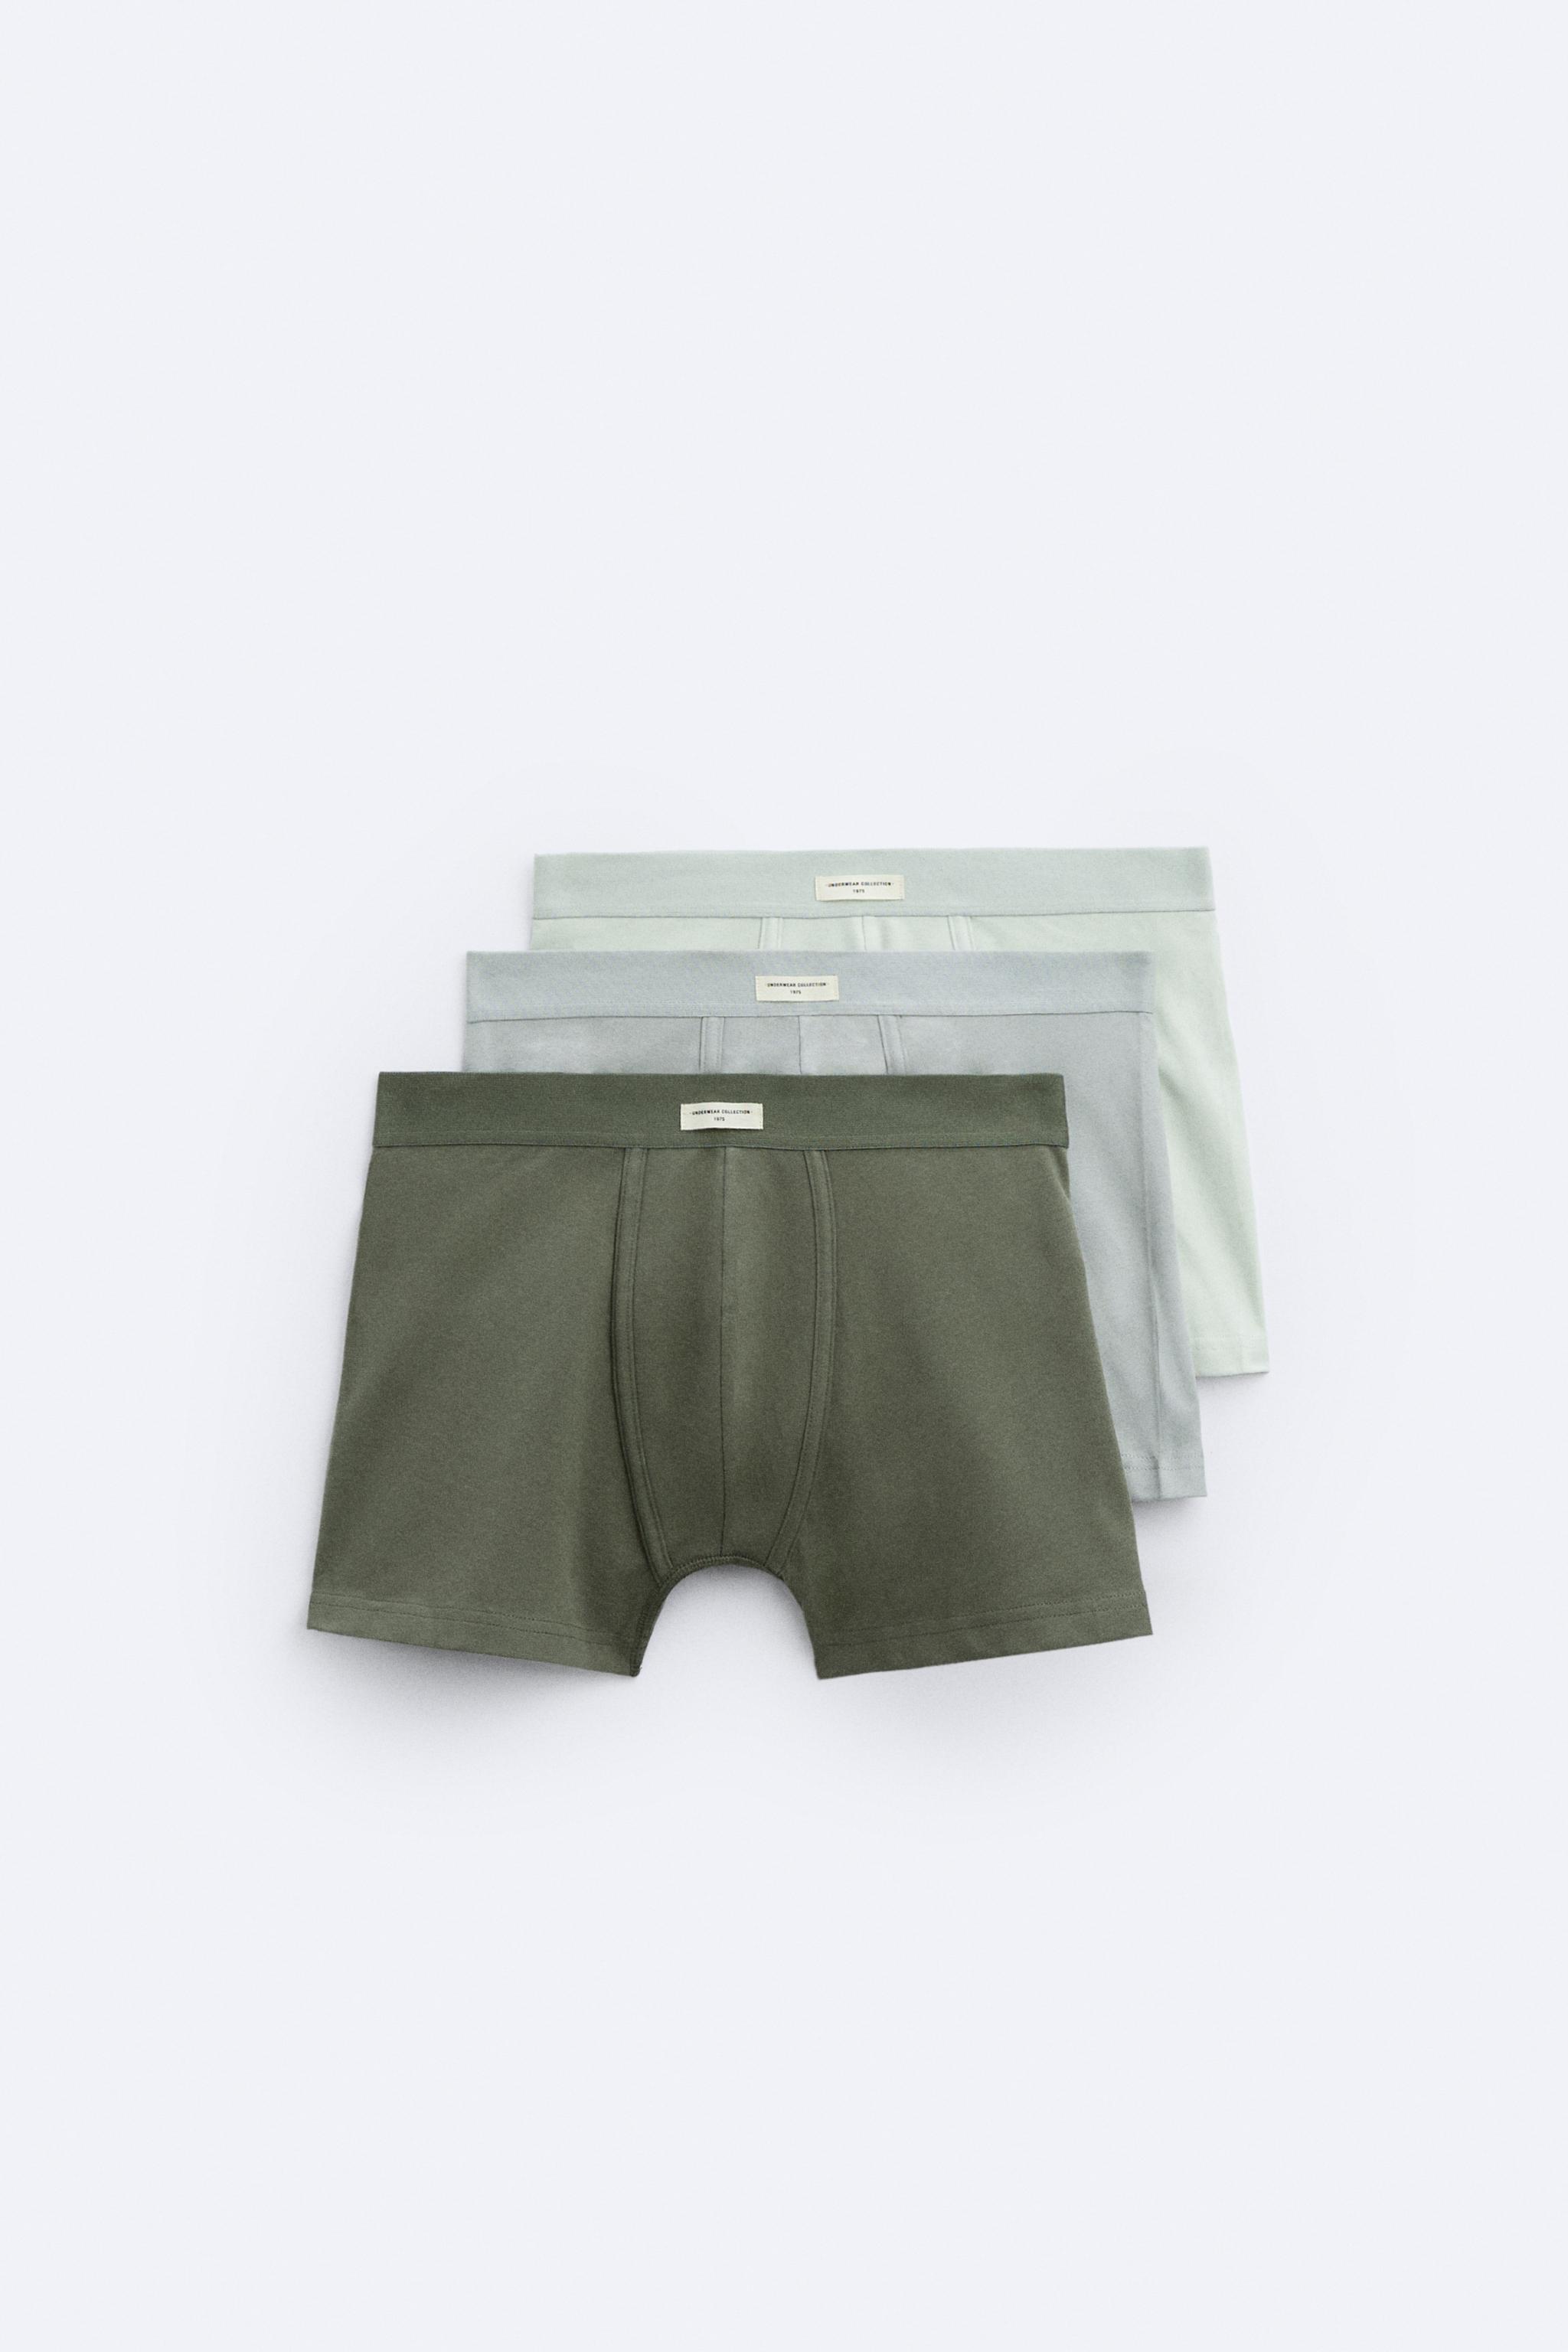 Quality Zara Men Boxers in Accra New Town - Clothing Accessories